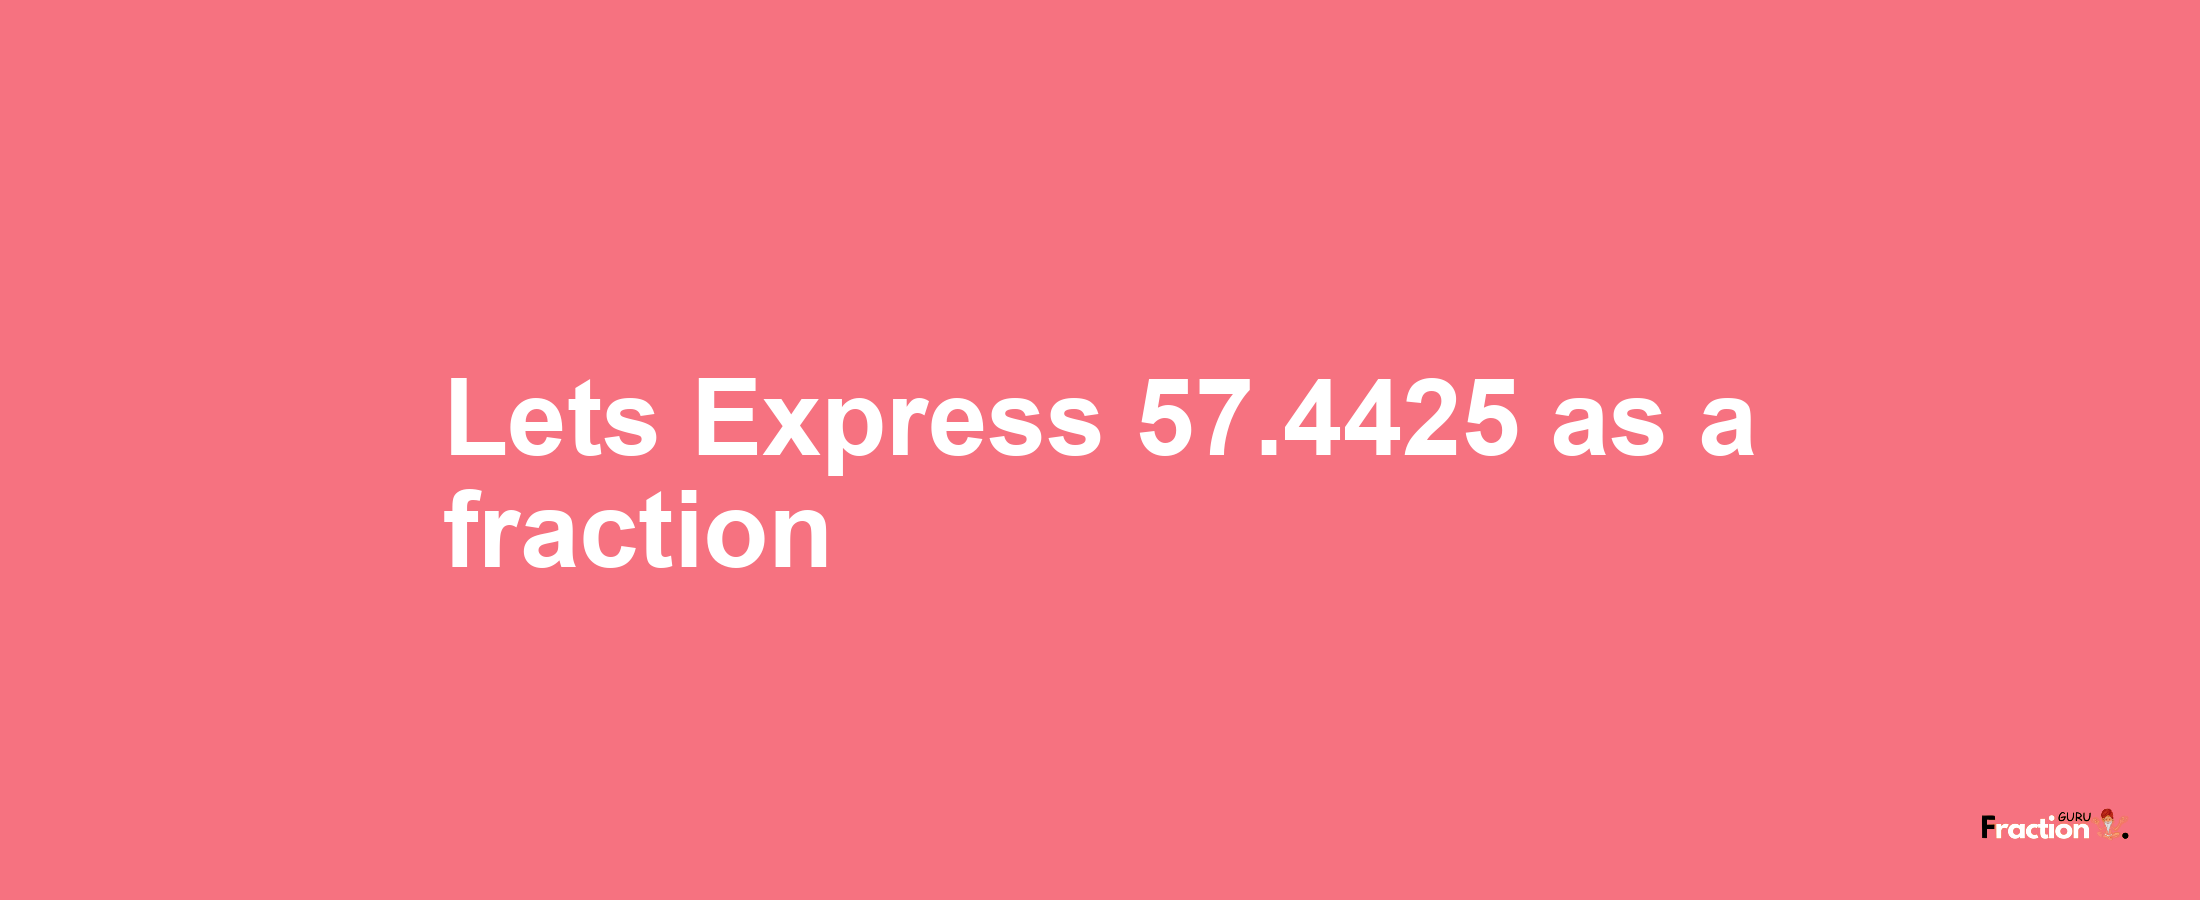 Lets Express 57.4425 as afraction